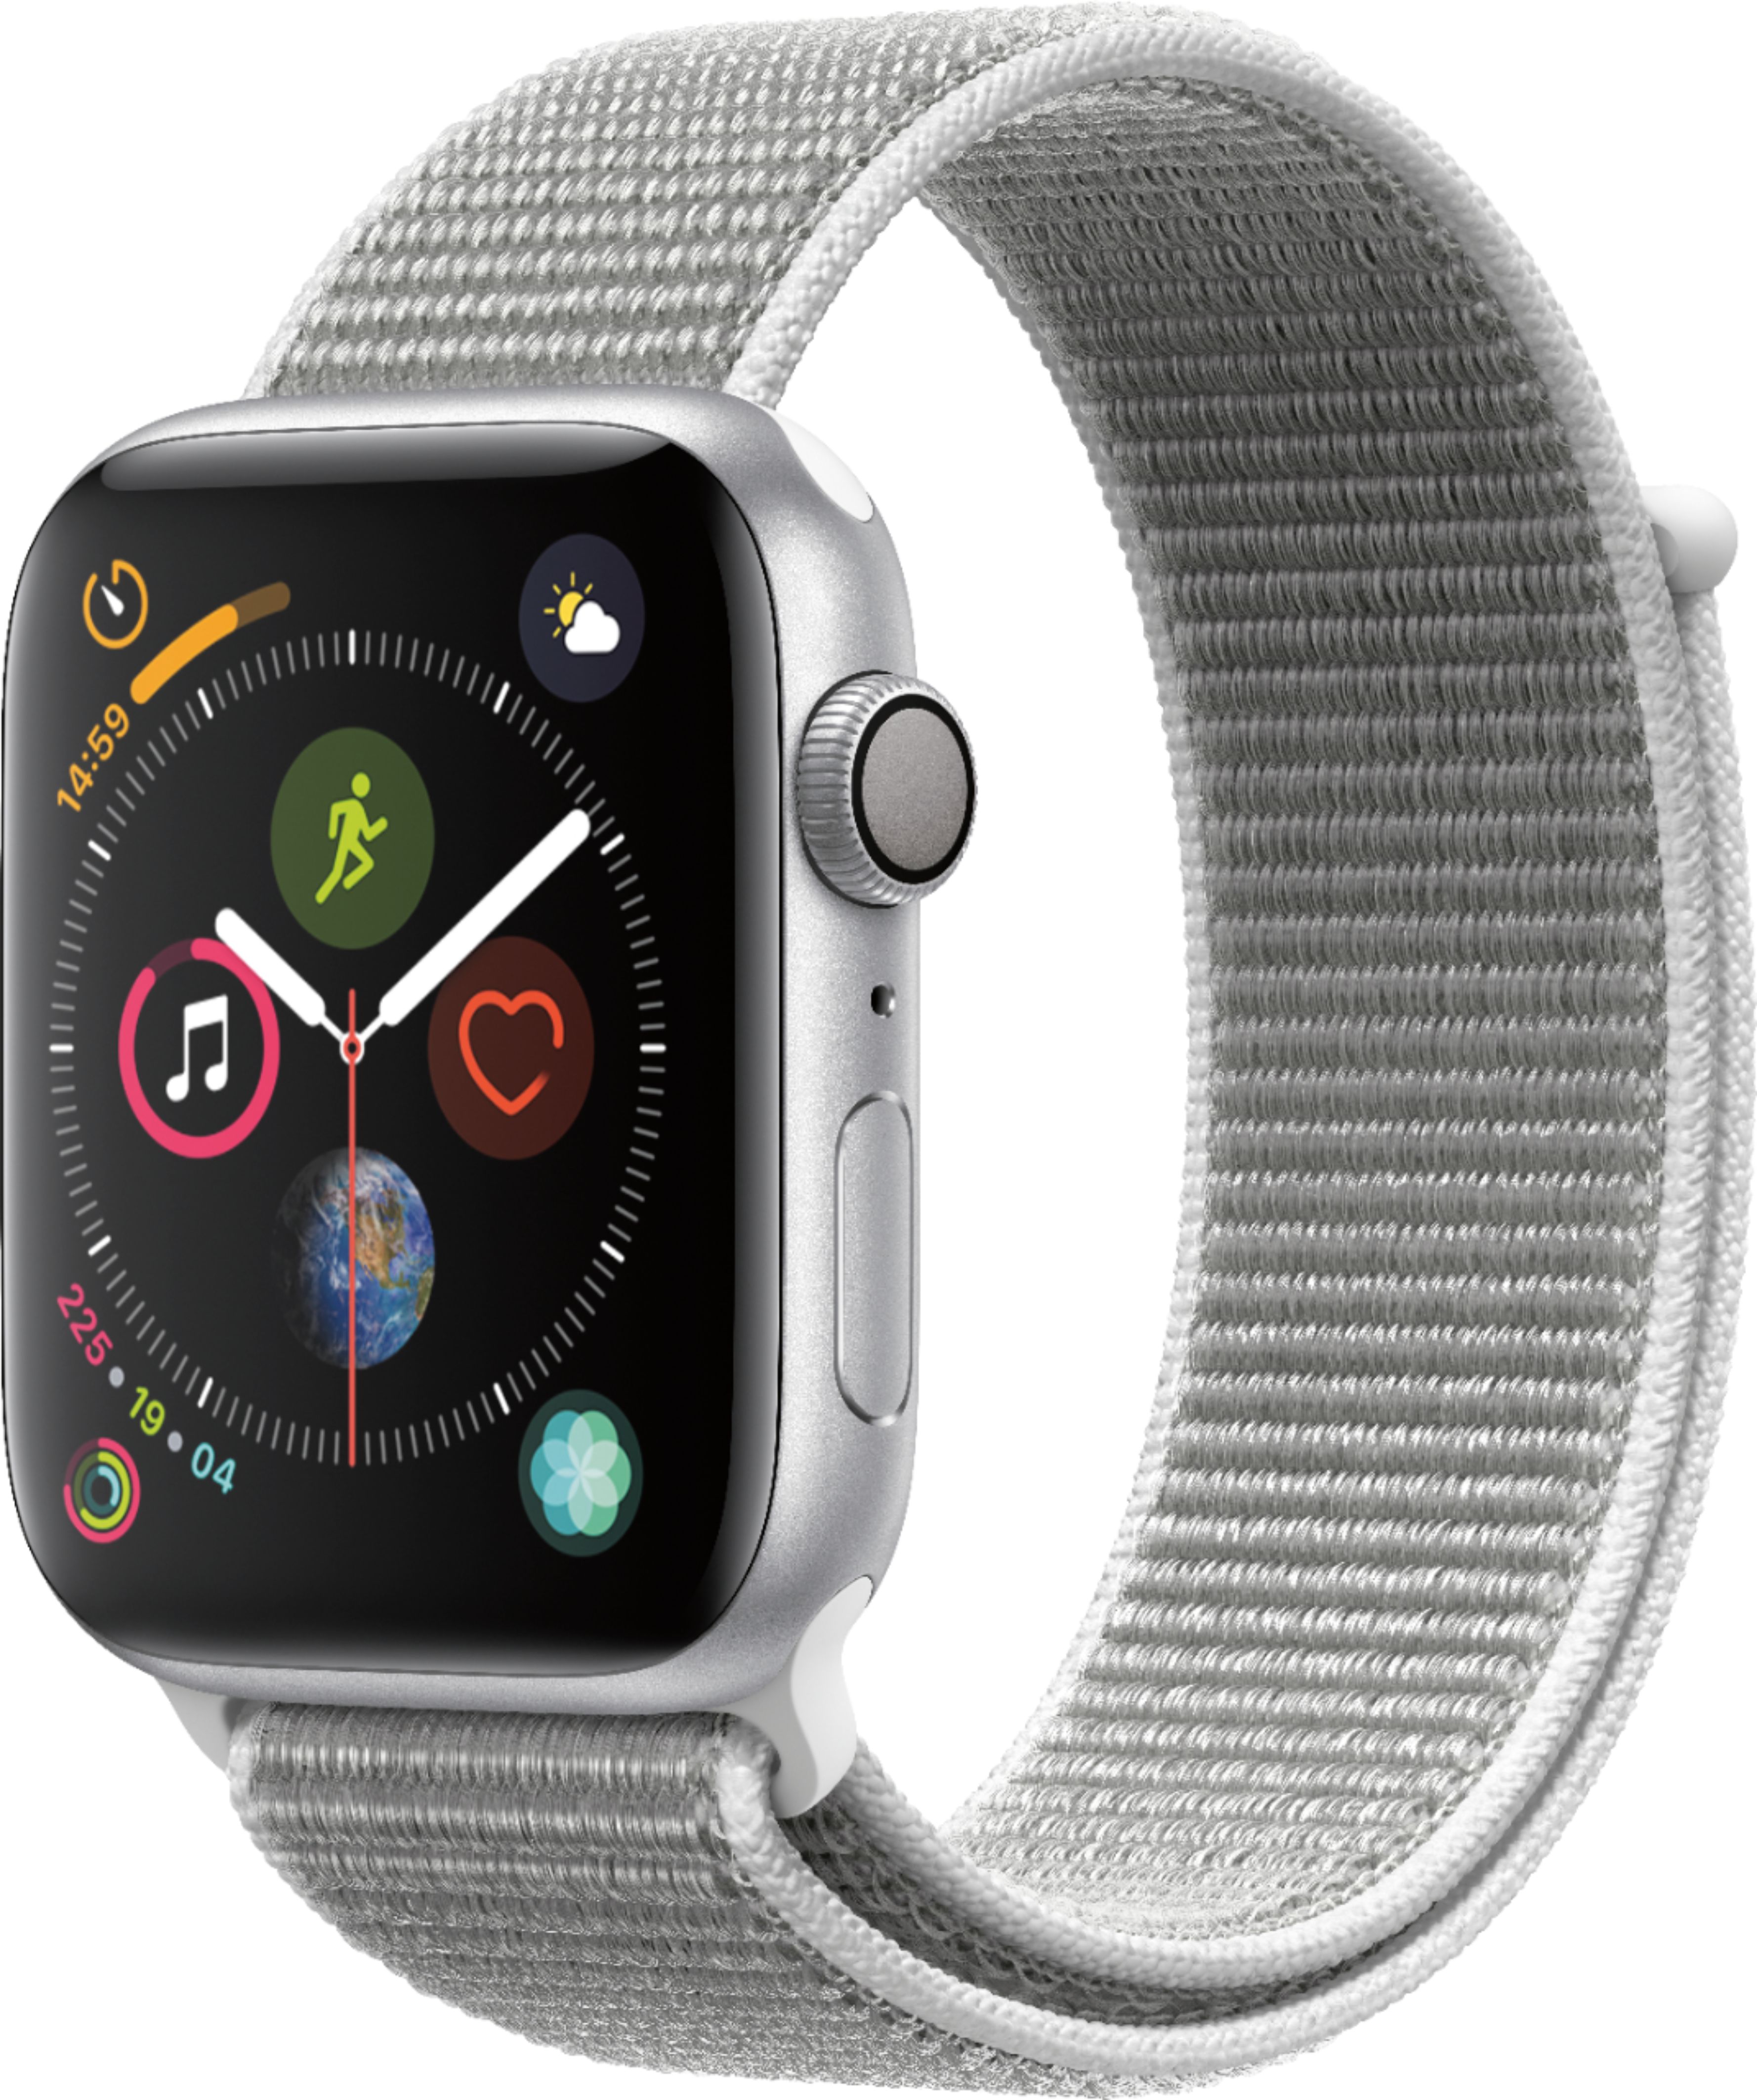 Apple Watch Series 4 (GPS) 44mm Silver Aluminum Case with Seashell Sport Loop - Silver Aluminum was $379.0 now $265.99 (30.0% off)